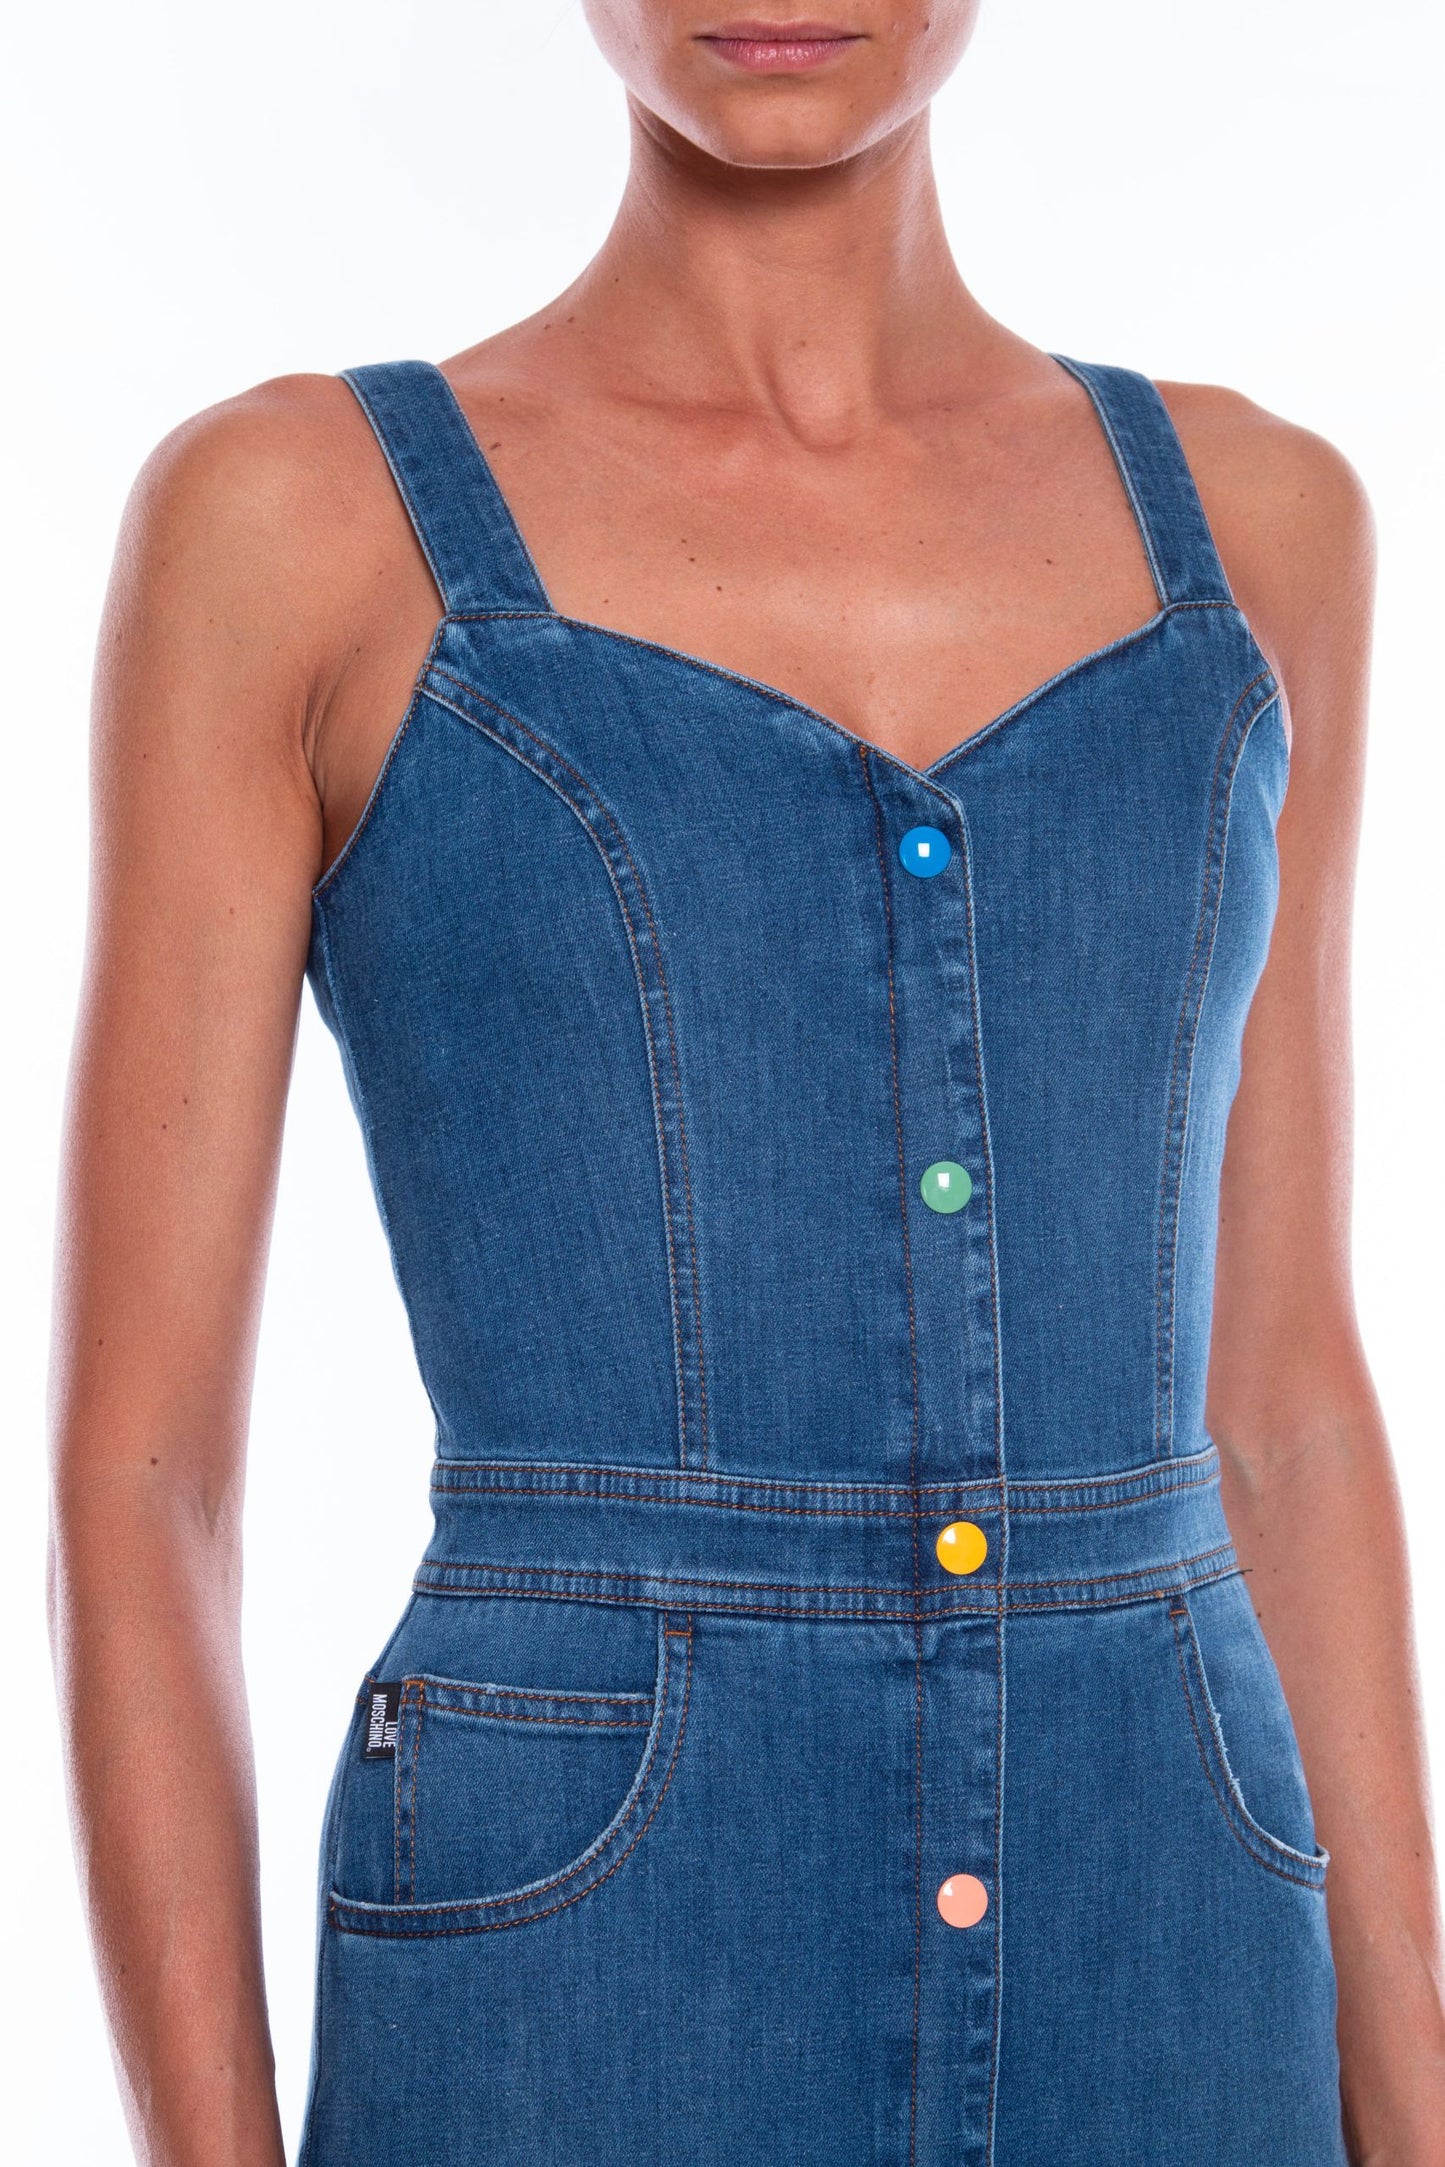 Chic Sleeveless Denim Dress with Colored Buttons